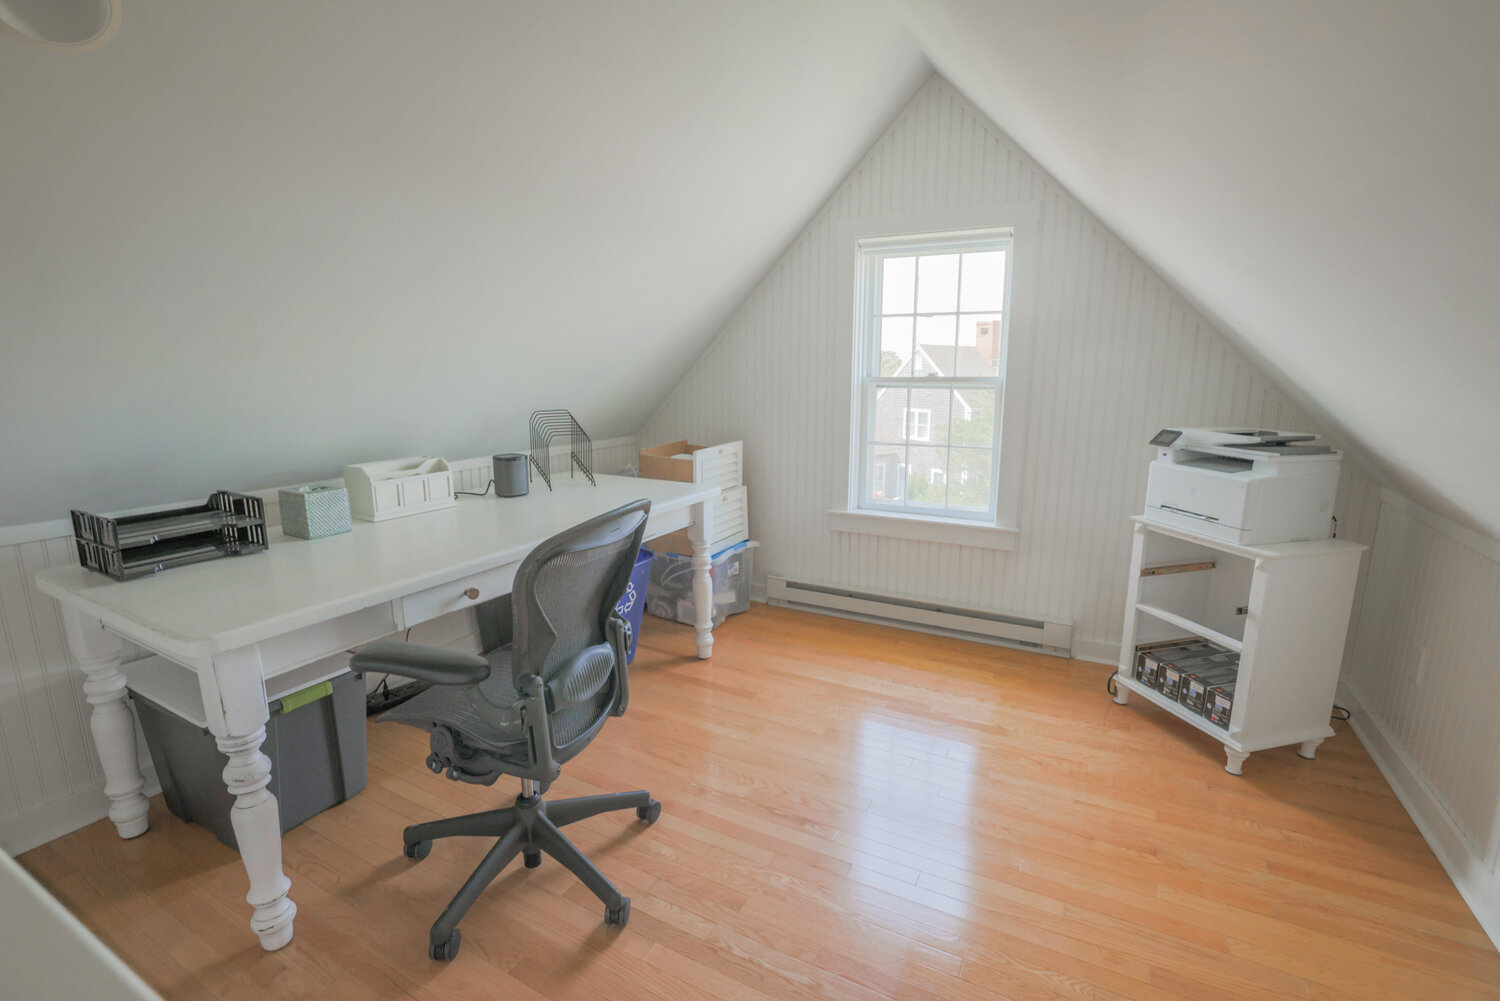 The third floor of the home has an office space, above, and guest bedroom.